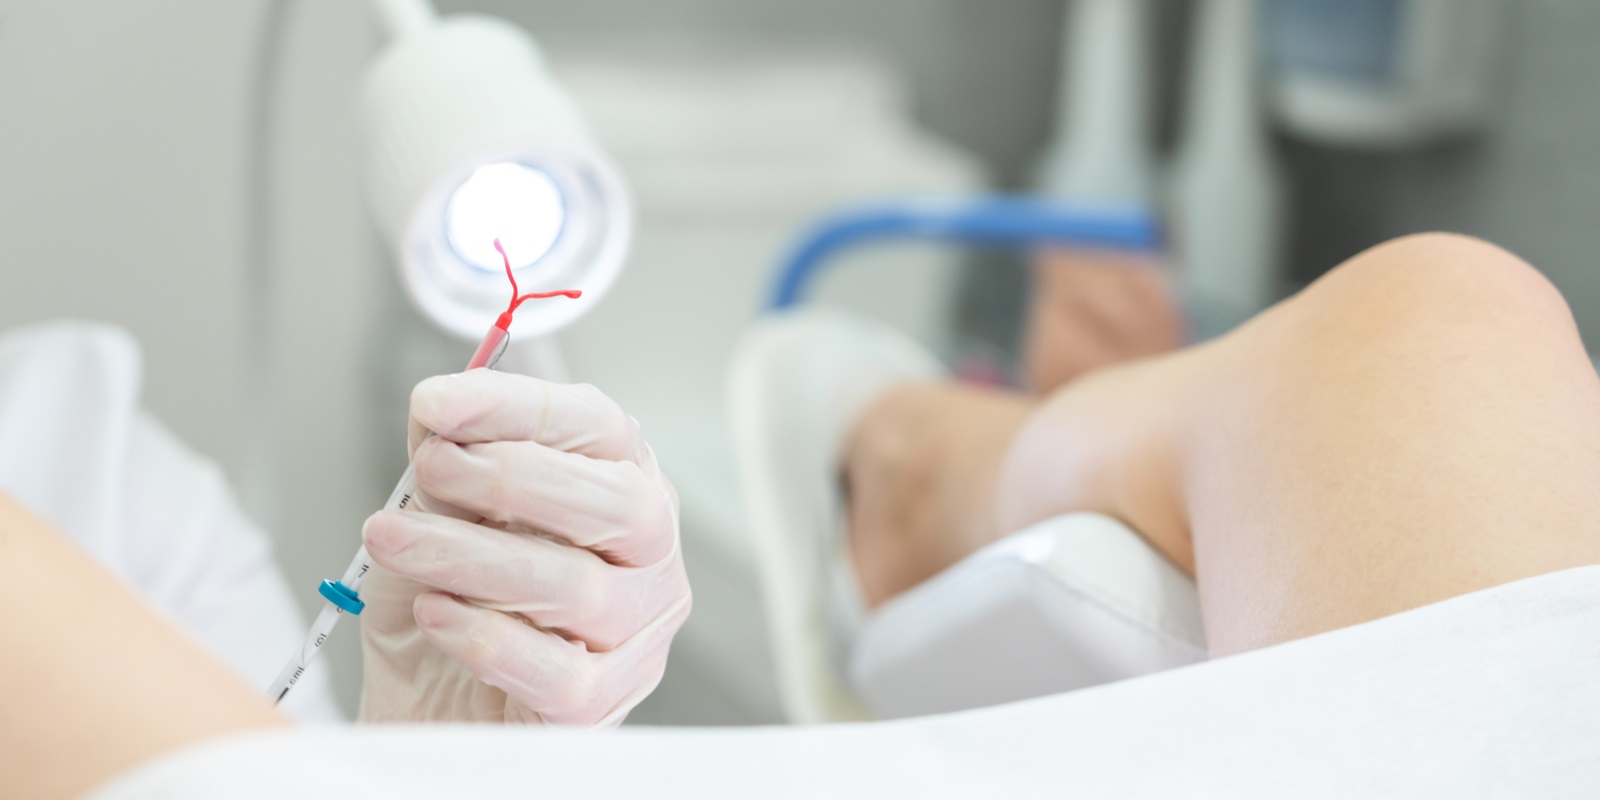 gynecologist holding an iud birth control device before using it for patient